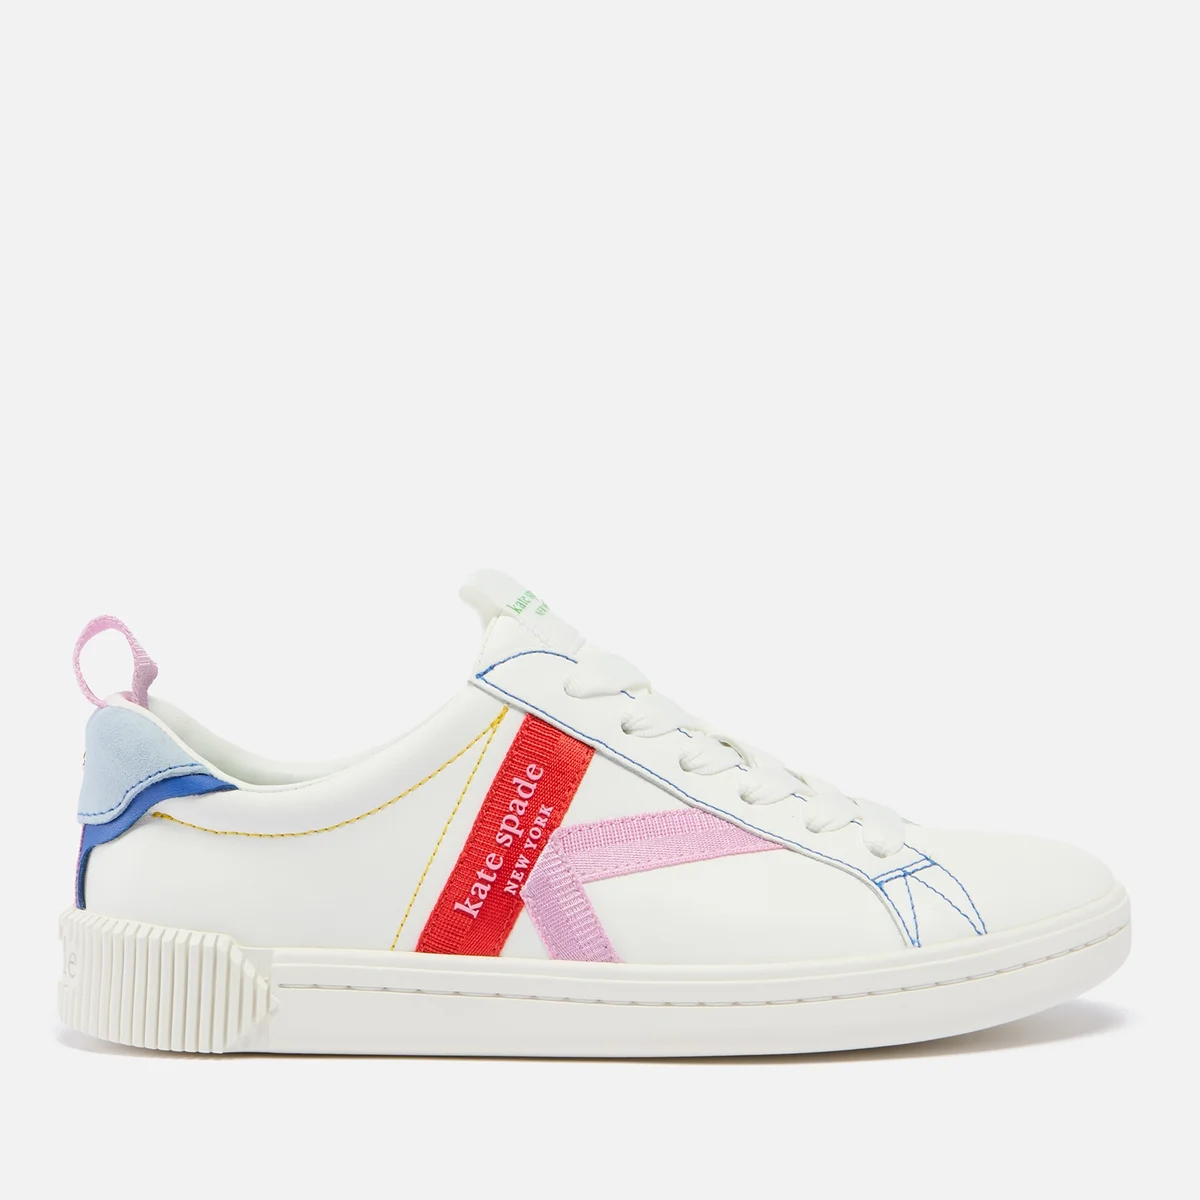 Kate Spade New York Women's Signature Leather Trainers Image 1